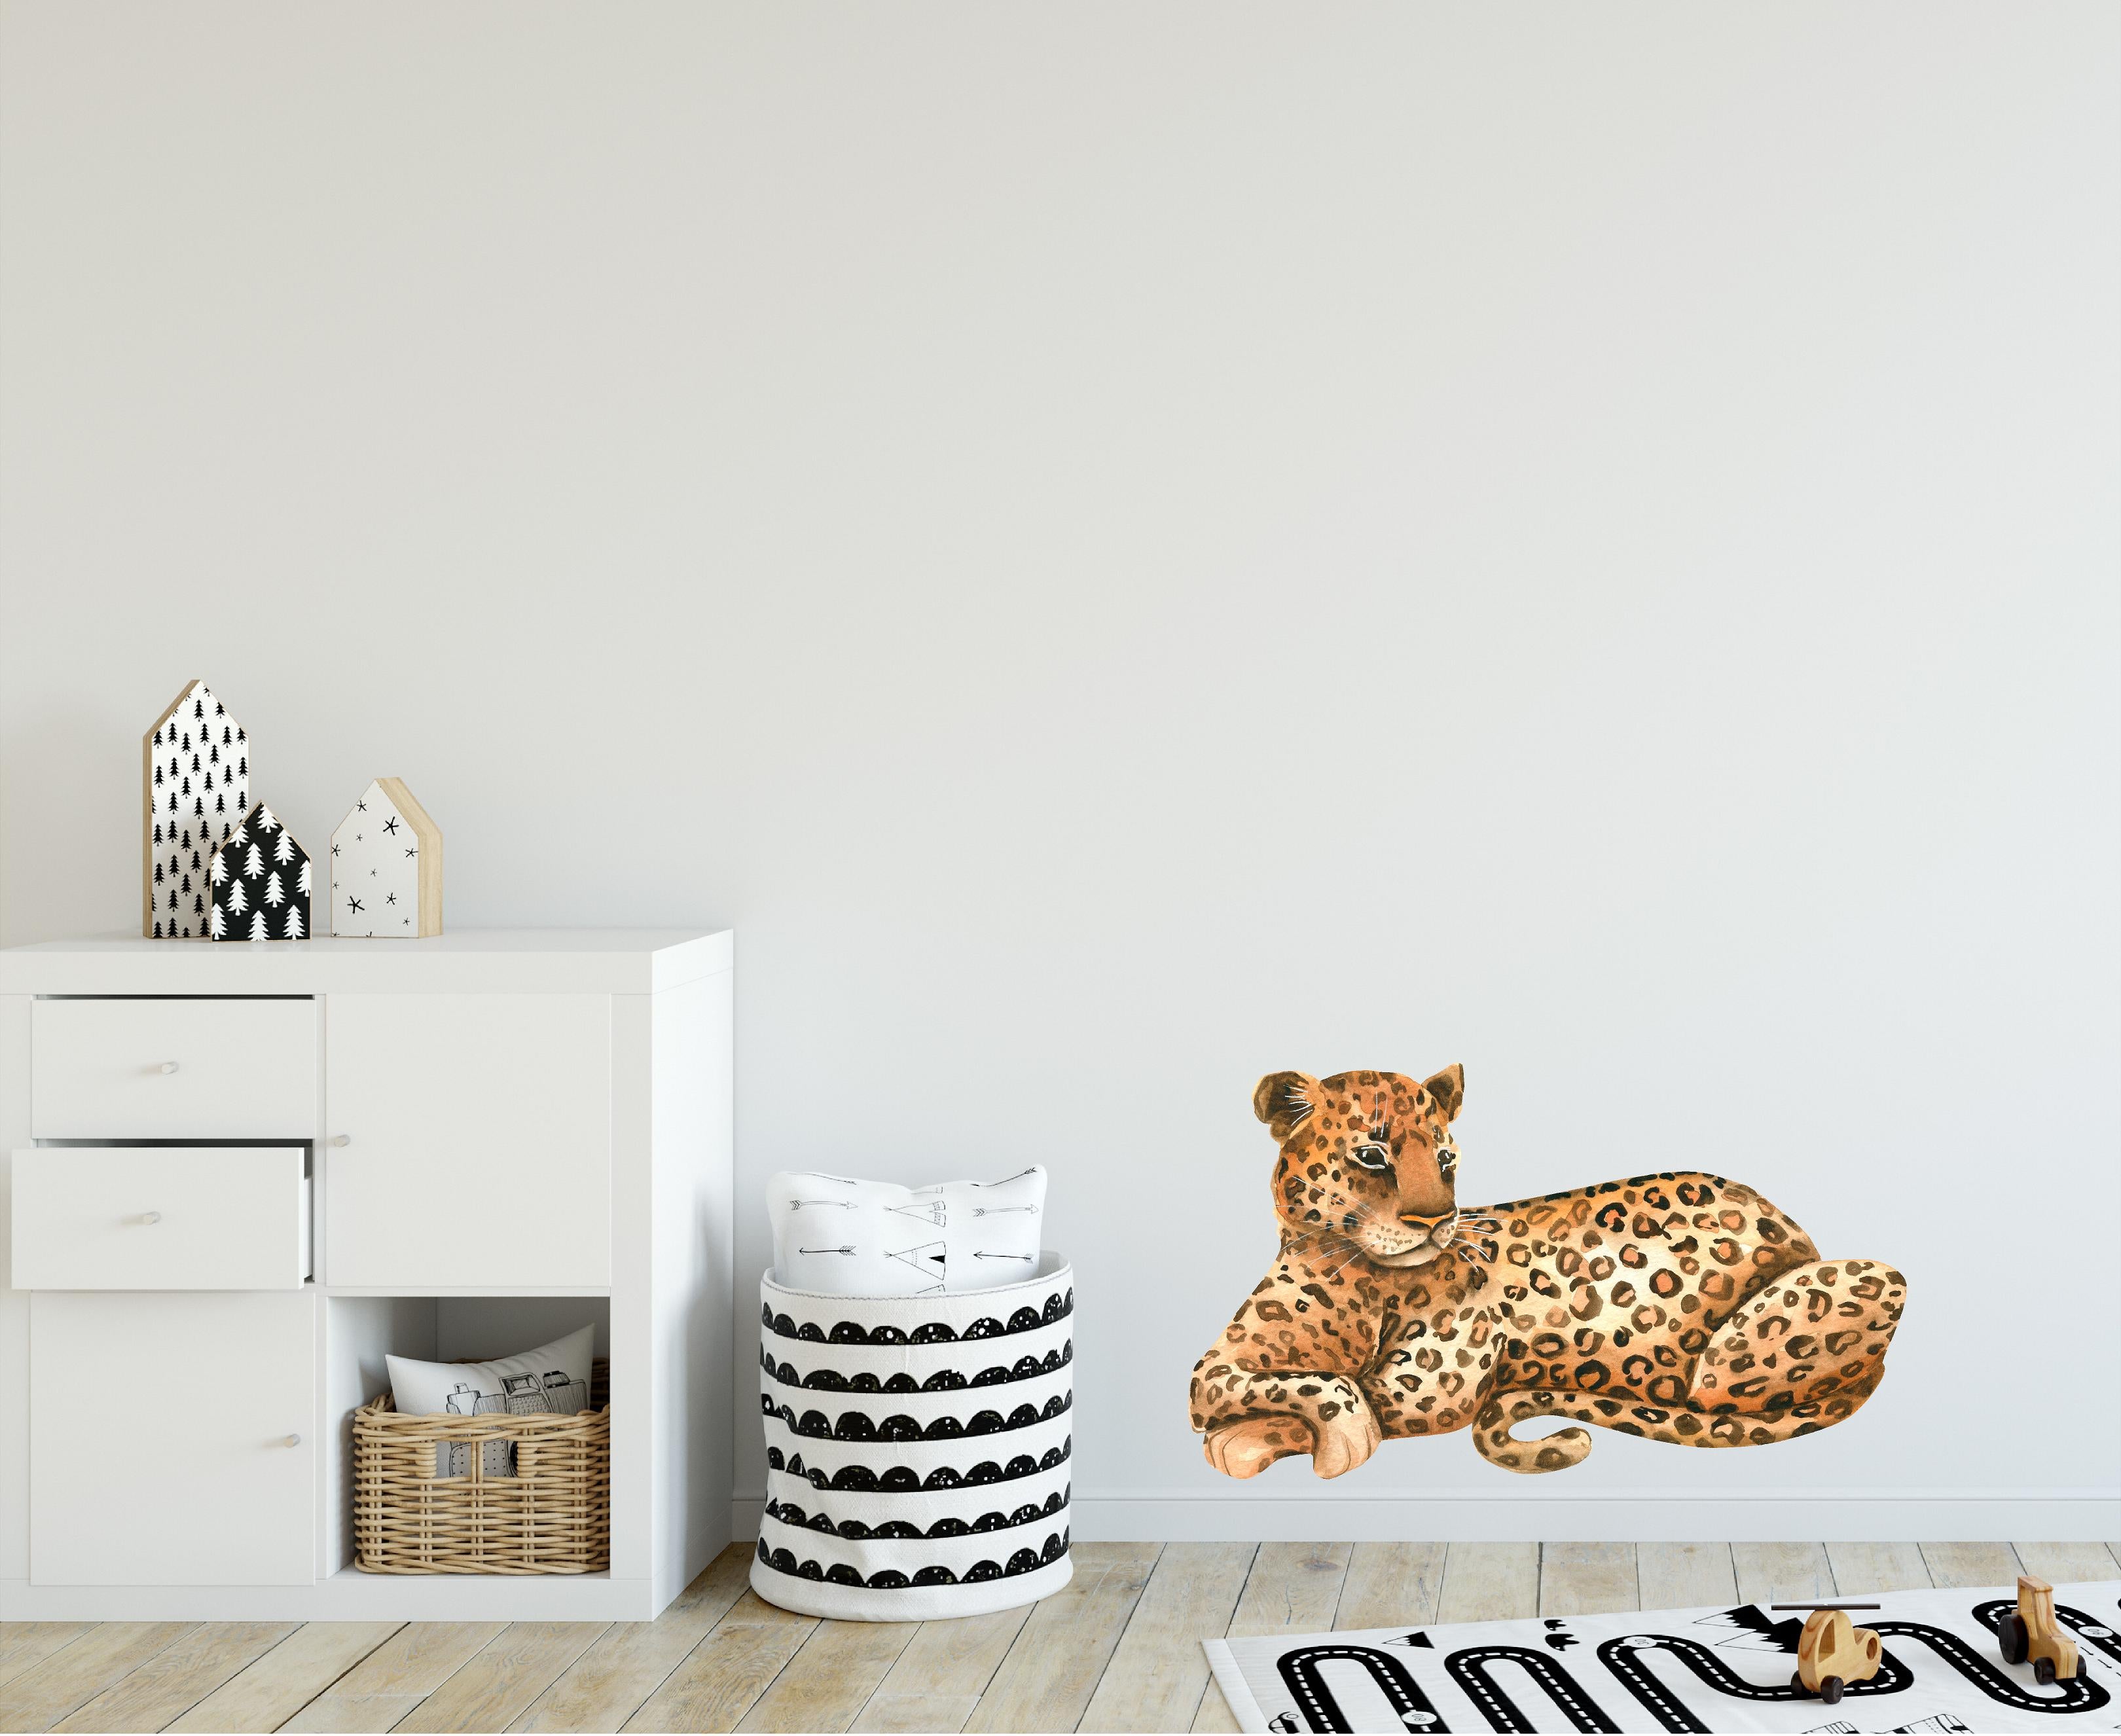 Leopard #3 Wall Decal Safari Animal Removable Fabric Wall Sticker | DecalBaby